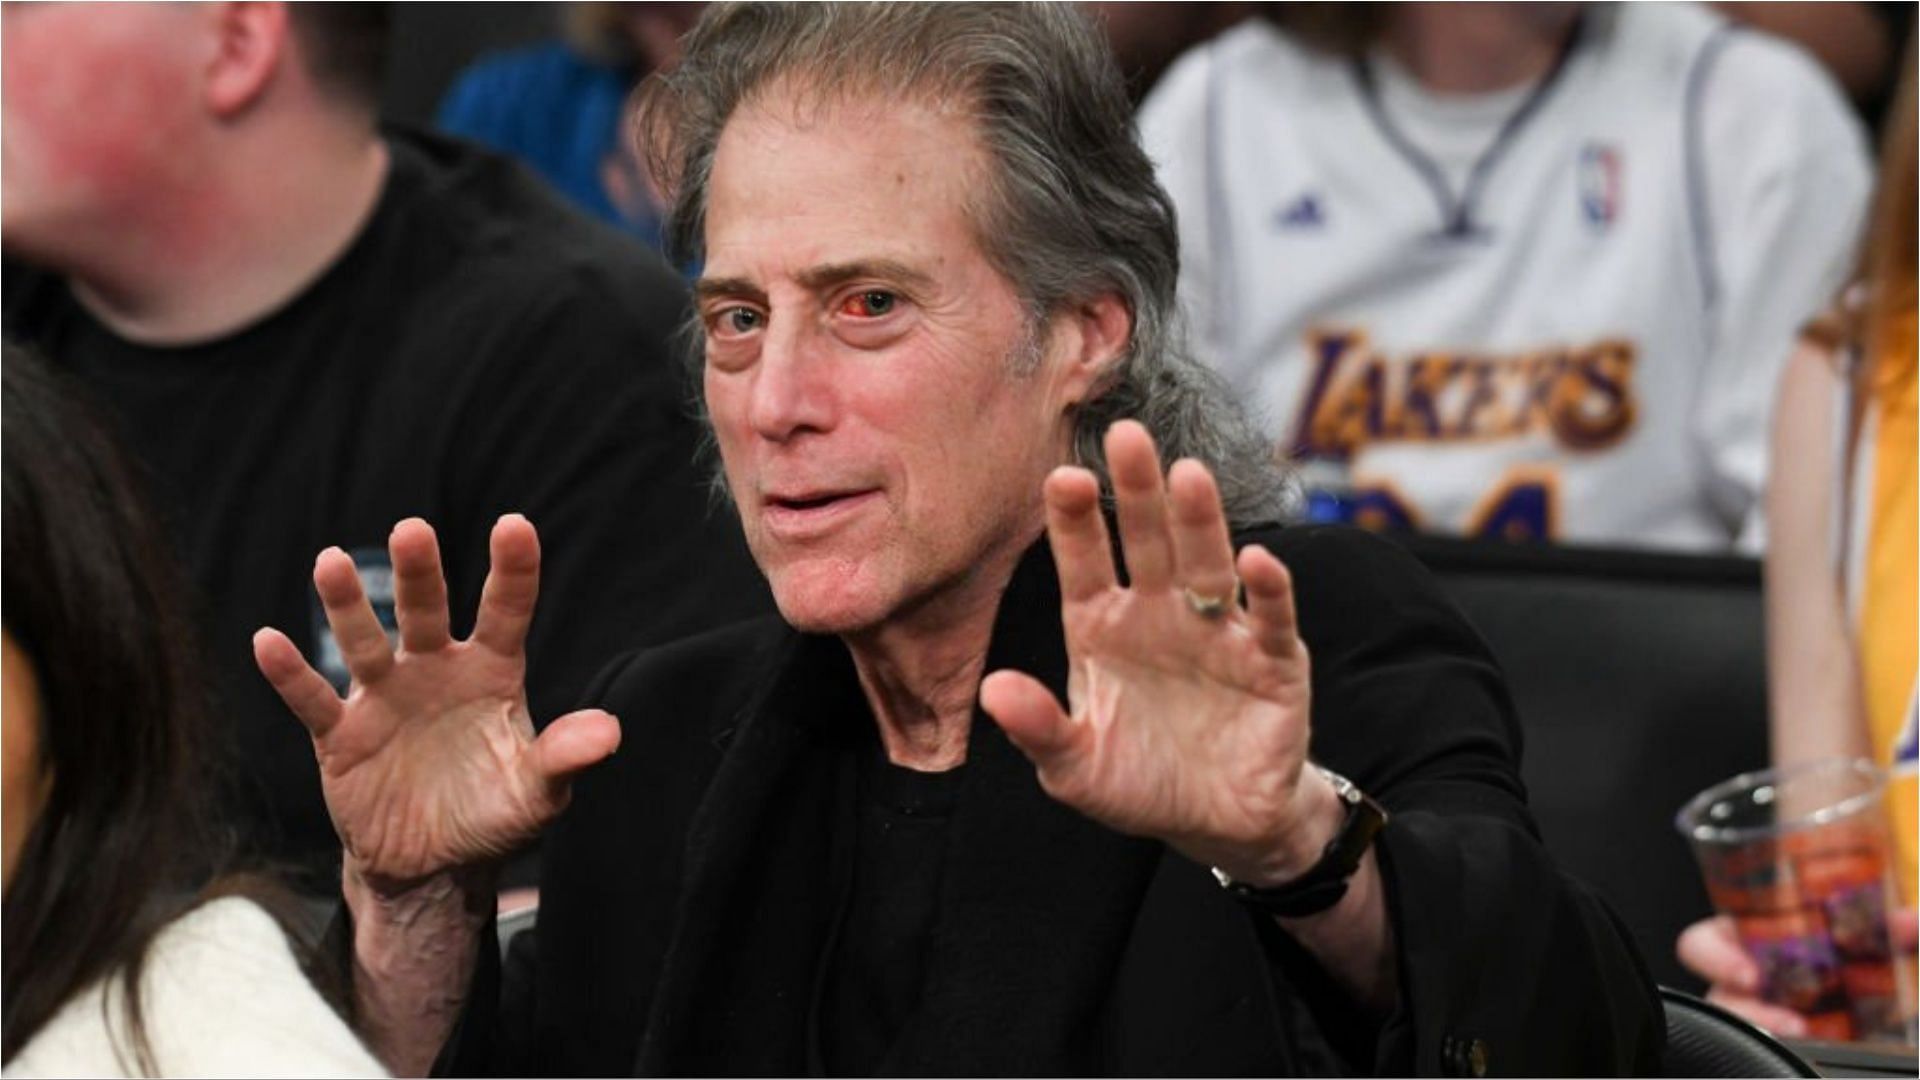 Richard Lewis has announced his retirement from standup comedy shows (Image via Allen Berezovsky/Getty Images)